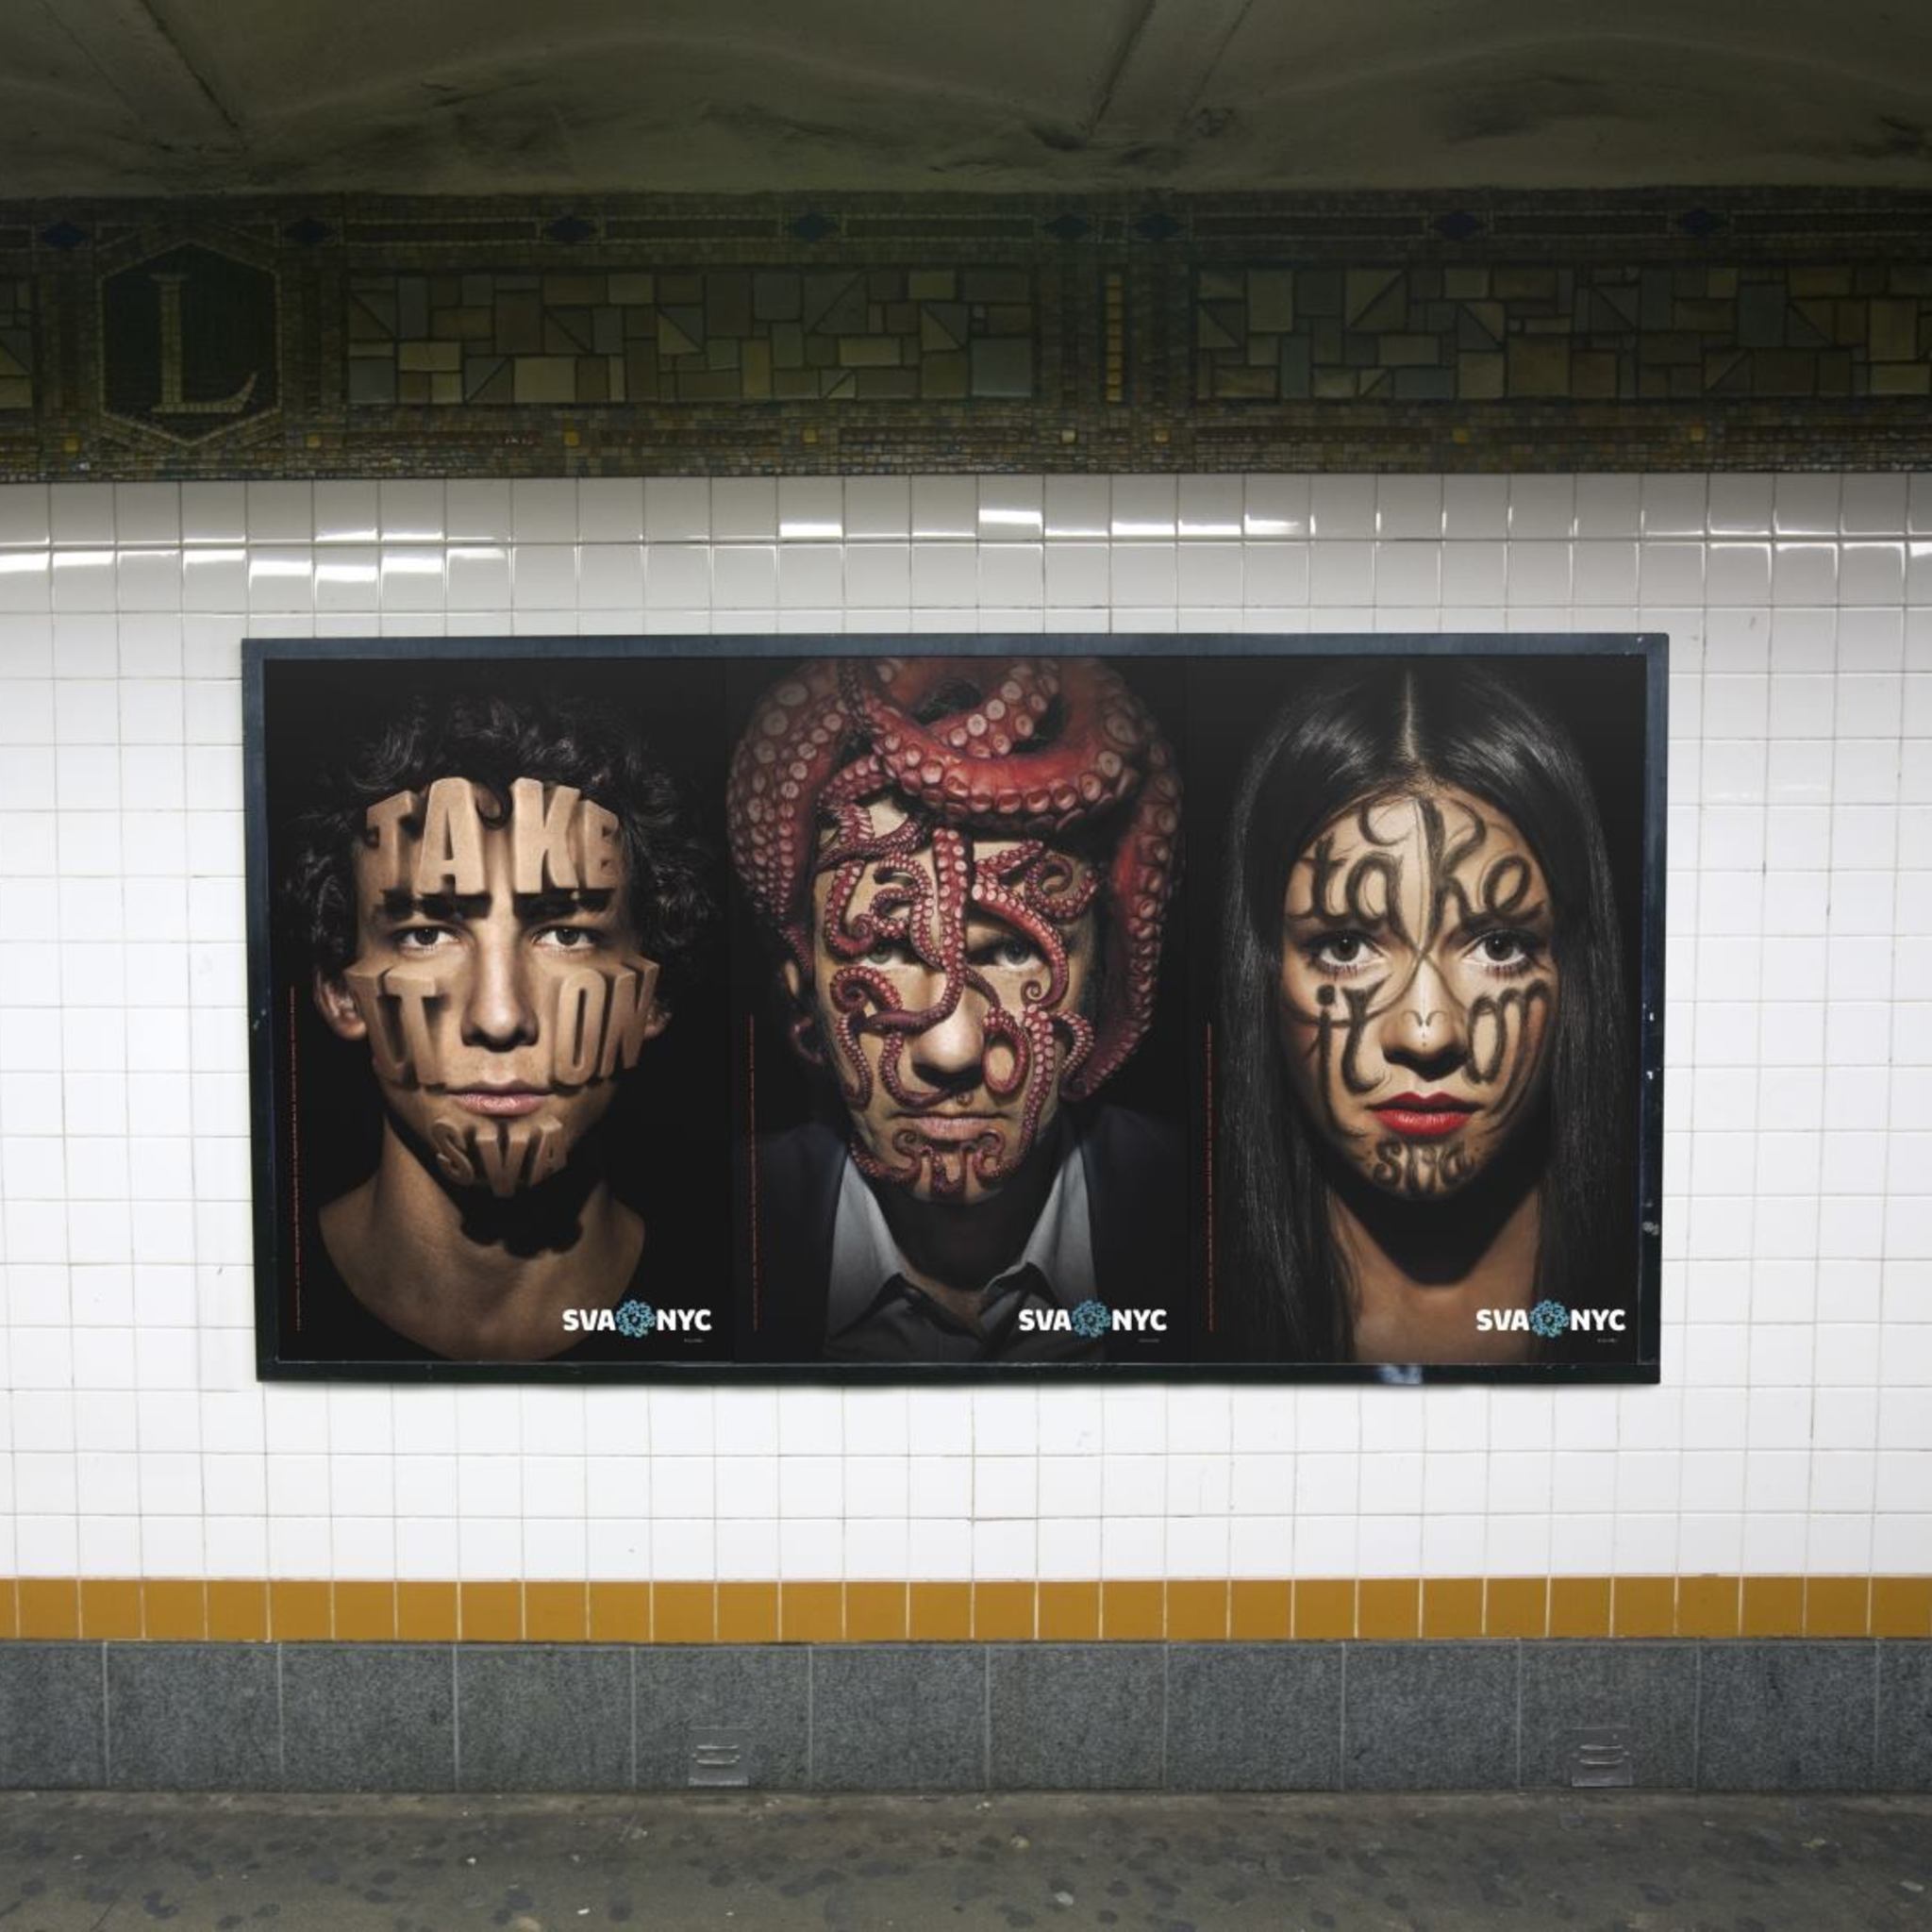 The exhibition of the New York subway Underground Images